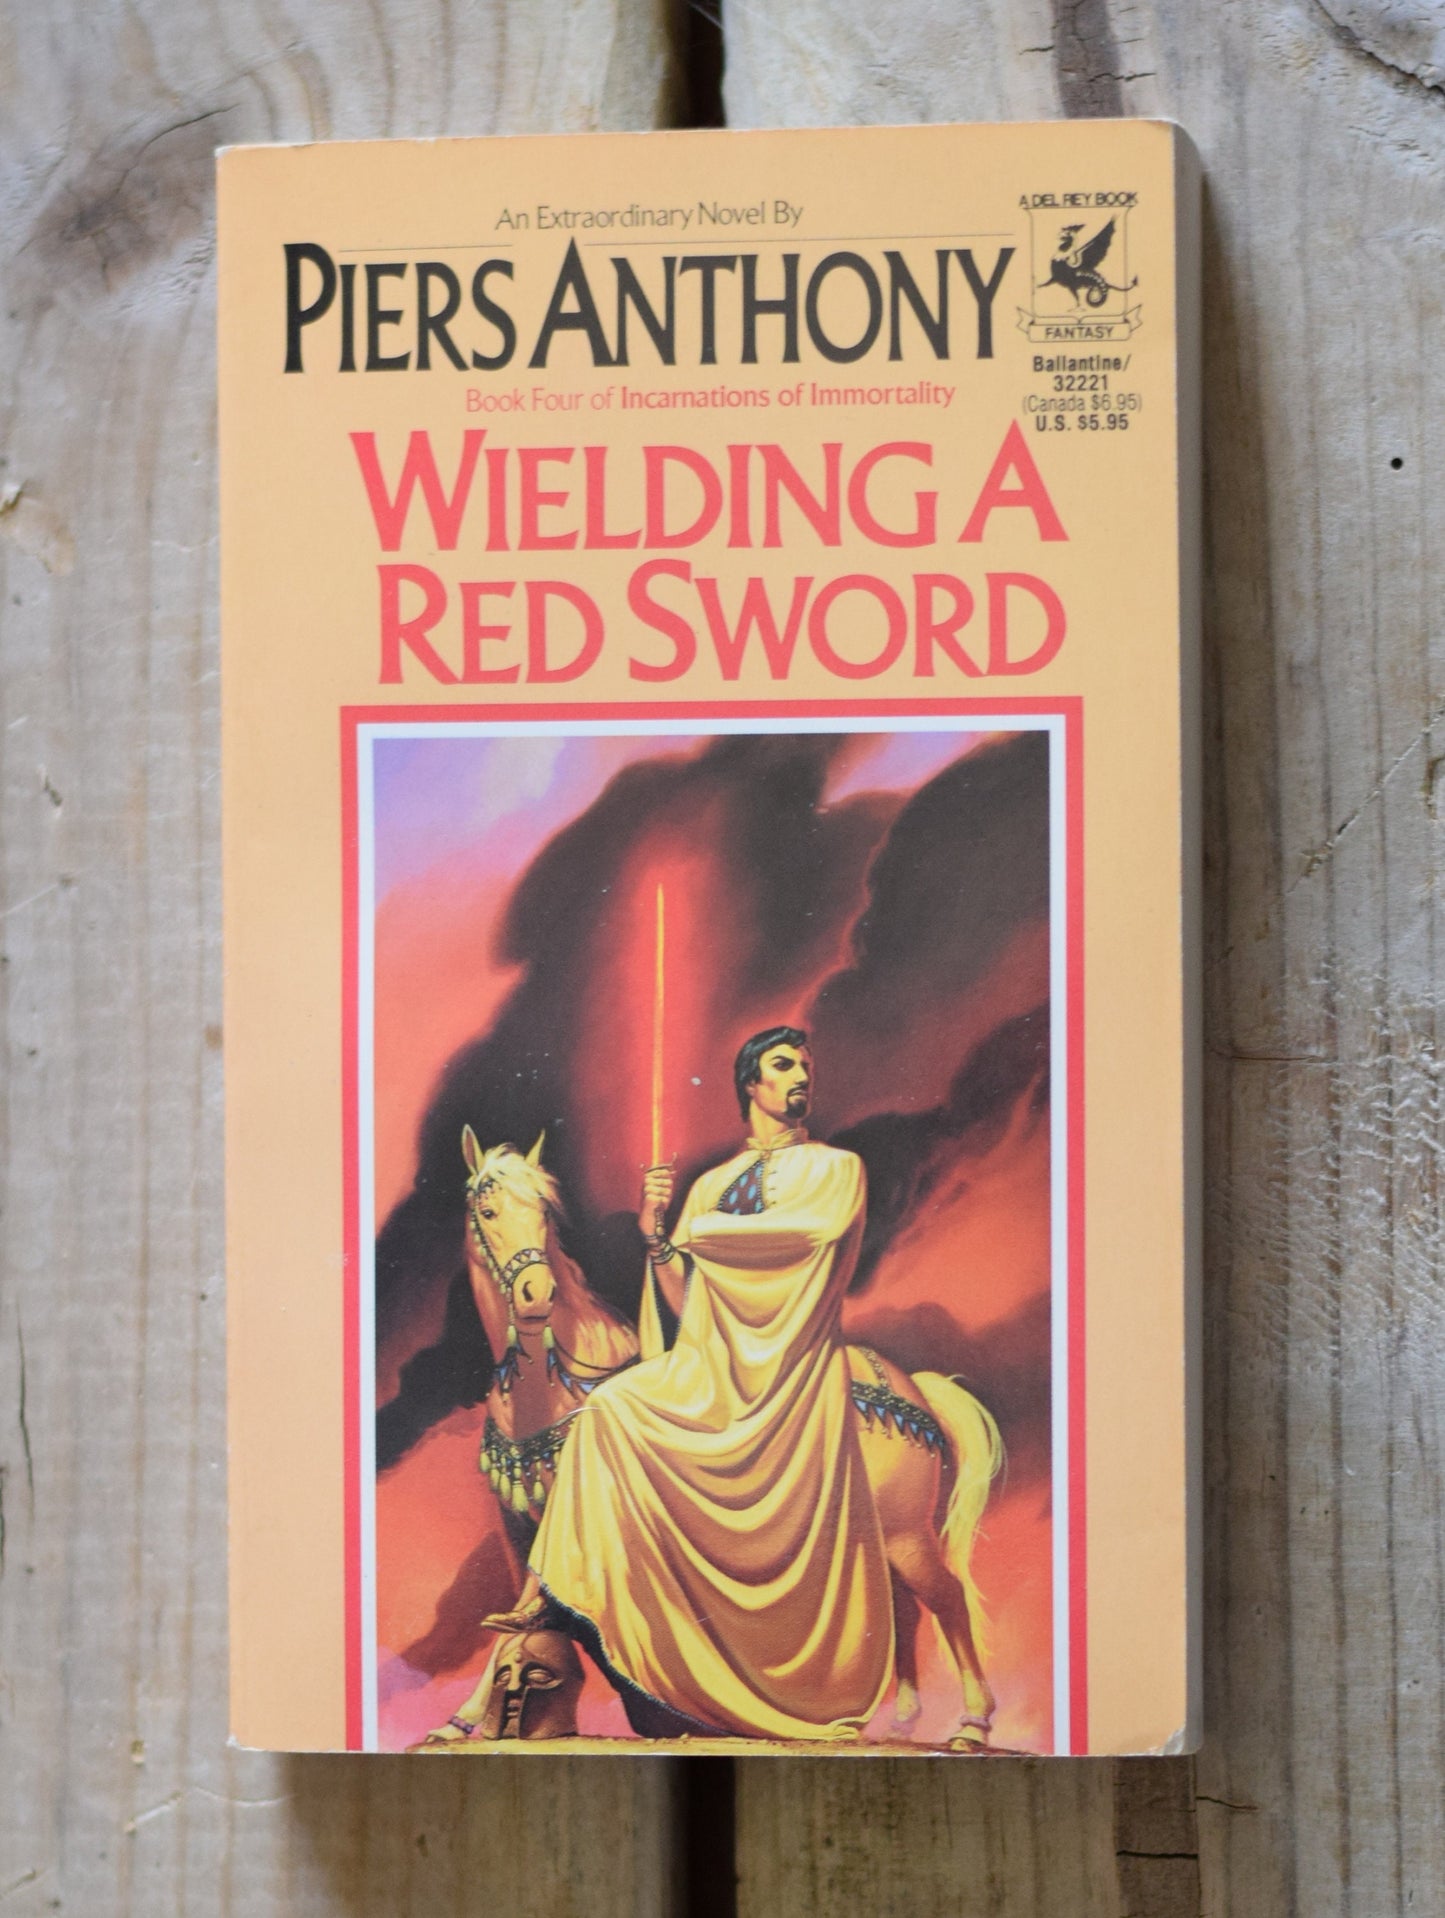 Vintage Fantasy Paperback Novel: Piers Anthony - Wielding a Red Sword, Book Four of Incarnations of Immortality